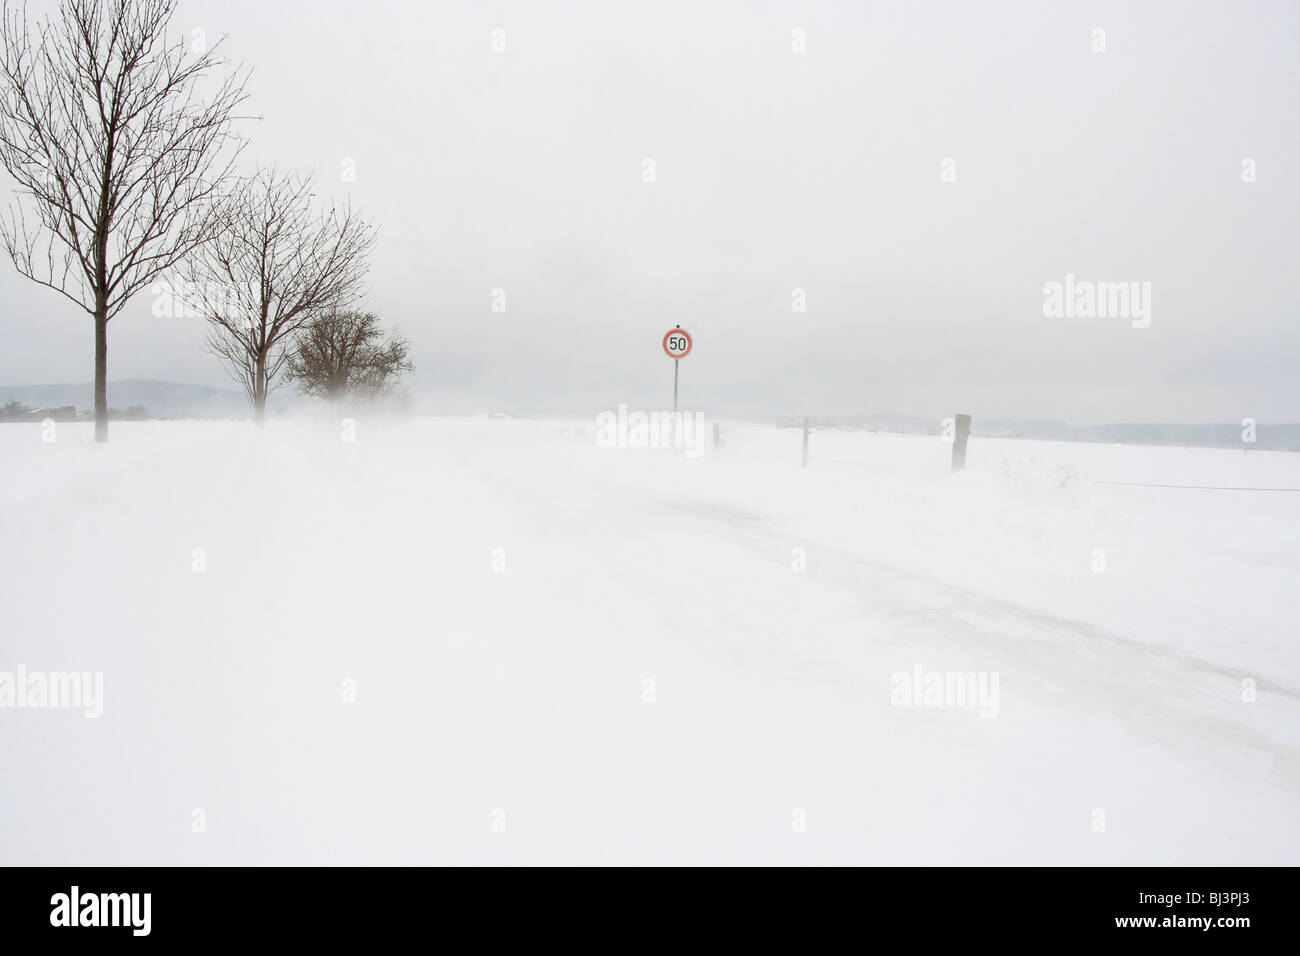 Snowbank on a country road Stock Photo